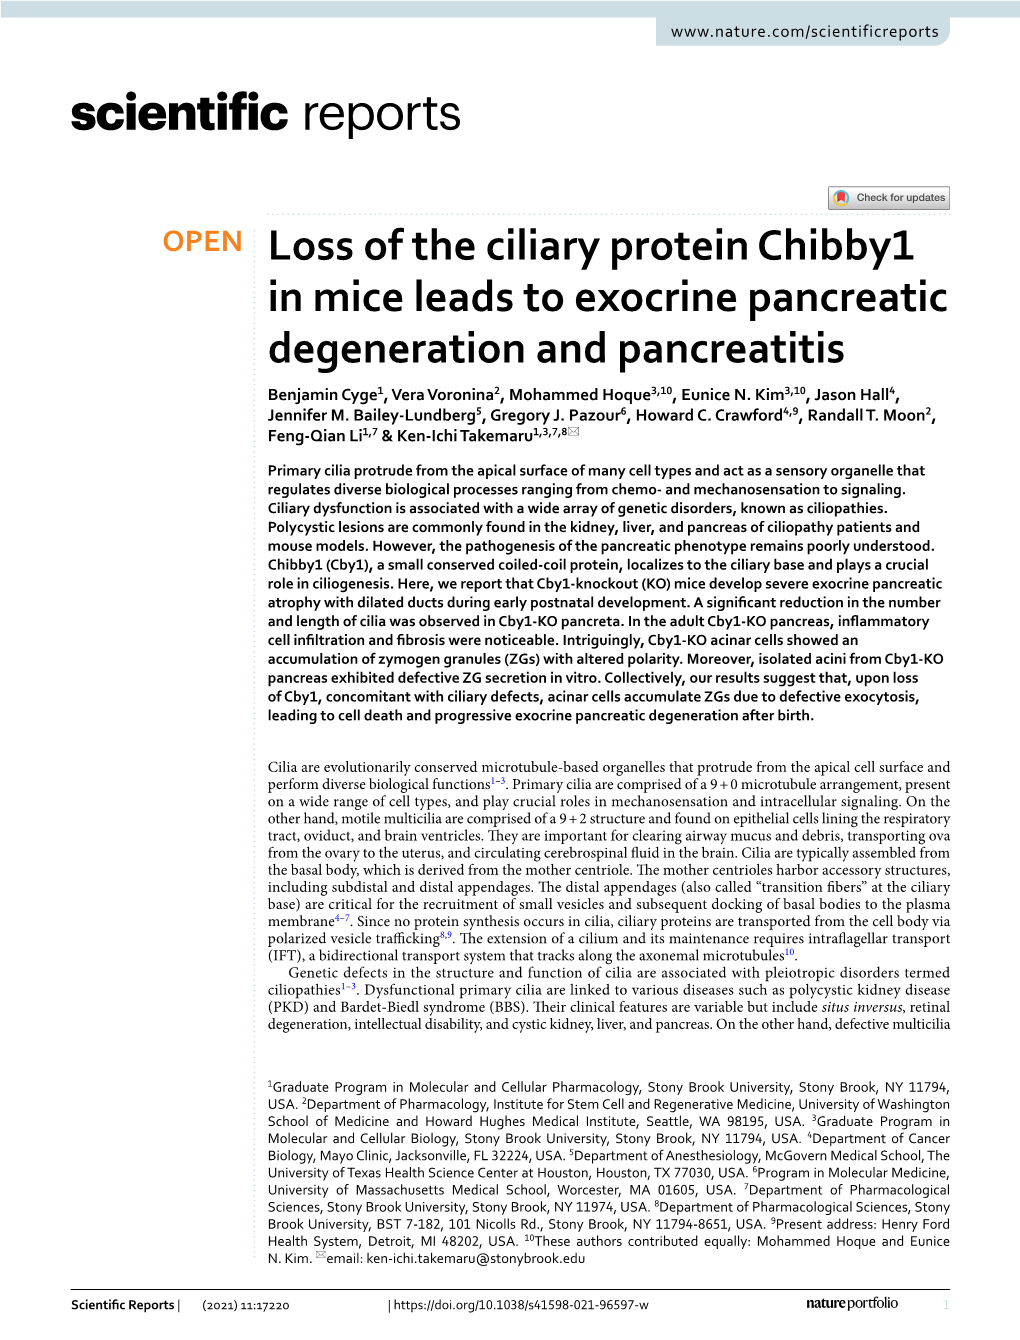 Loss of the Ciliary Protein Chibby1 in Mice Leads to Exocrine Pancreatic Degeneration and Pancreatitis Benjamin Cyge1, Vera Voronina2, Mohammed Hoque3,10, Eunice N